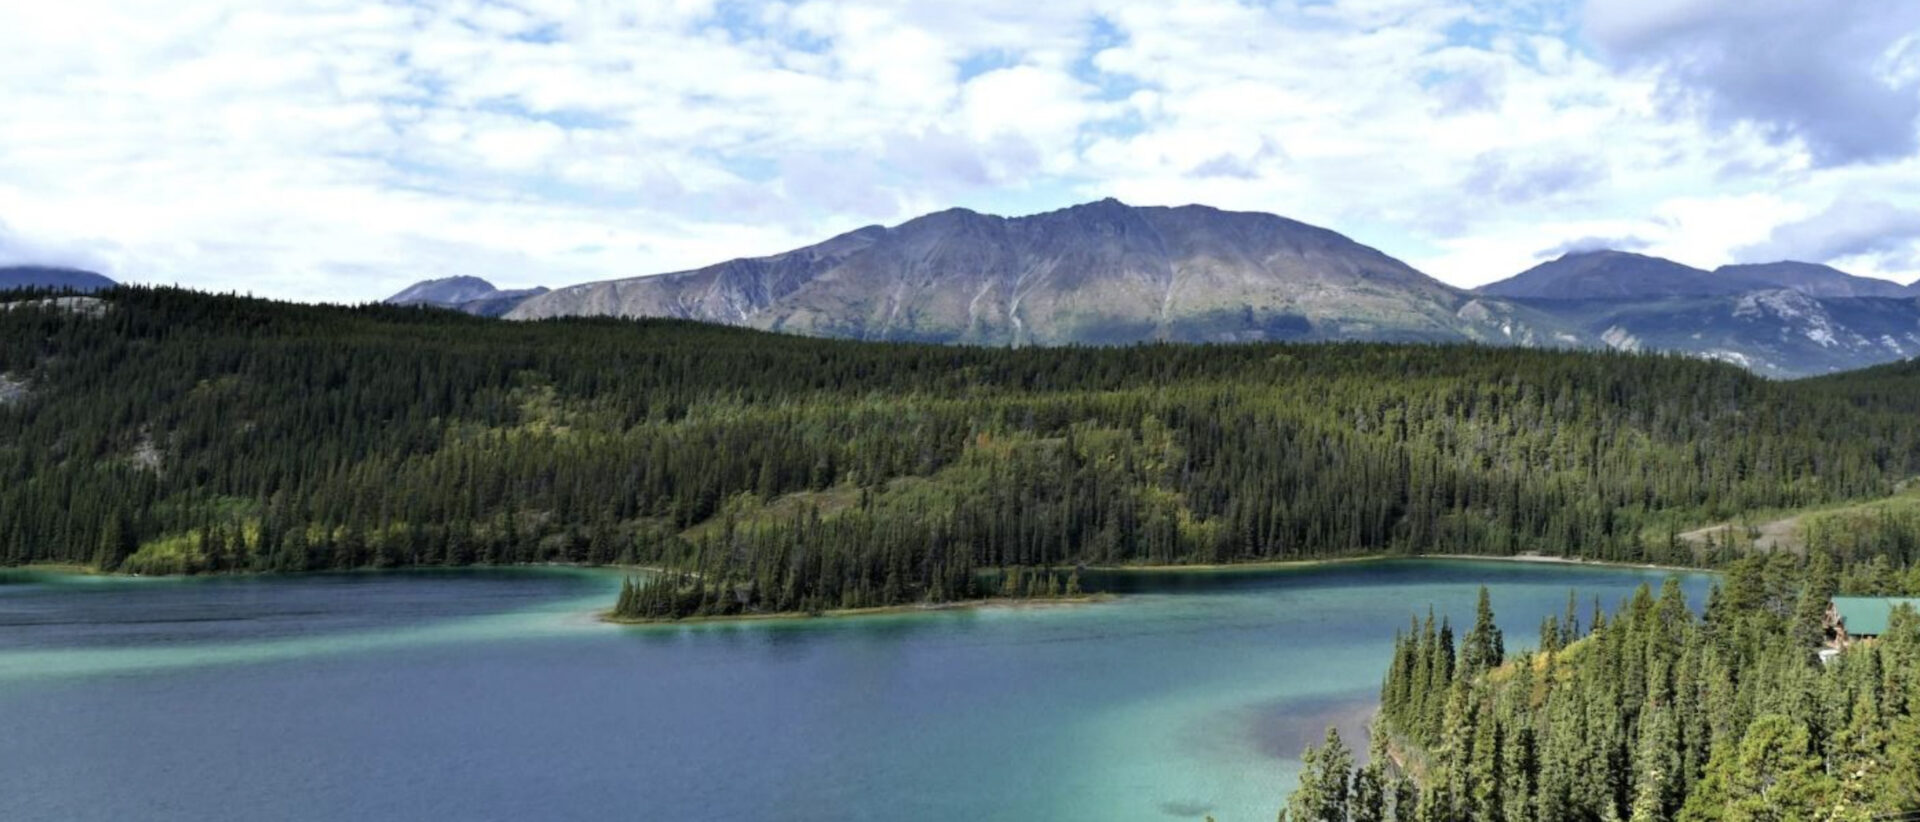 Light blue lake surrounded by green trees and a mountainous range